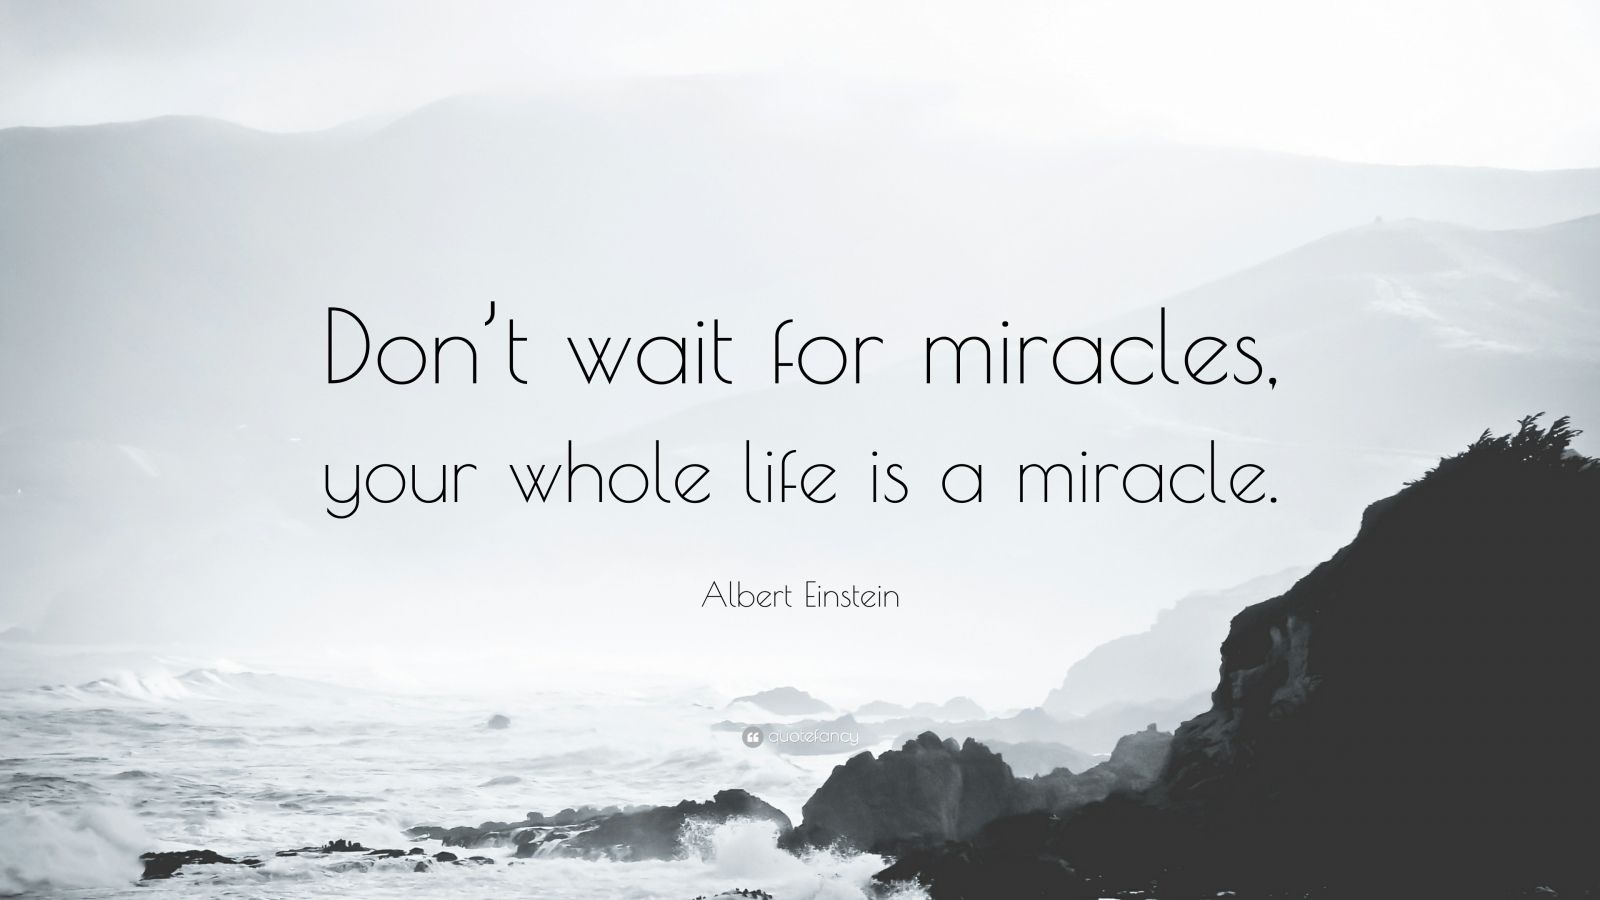 Albert Einstein Quote: “Don’t wait for miracles, your whole life is a ...